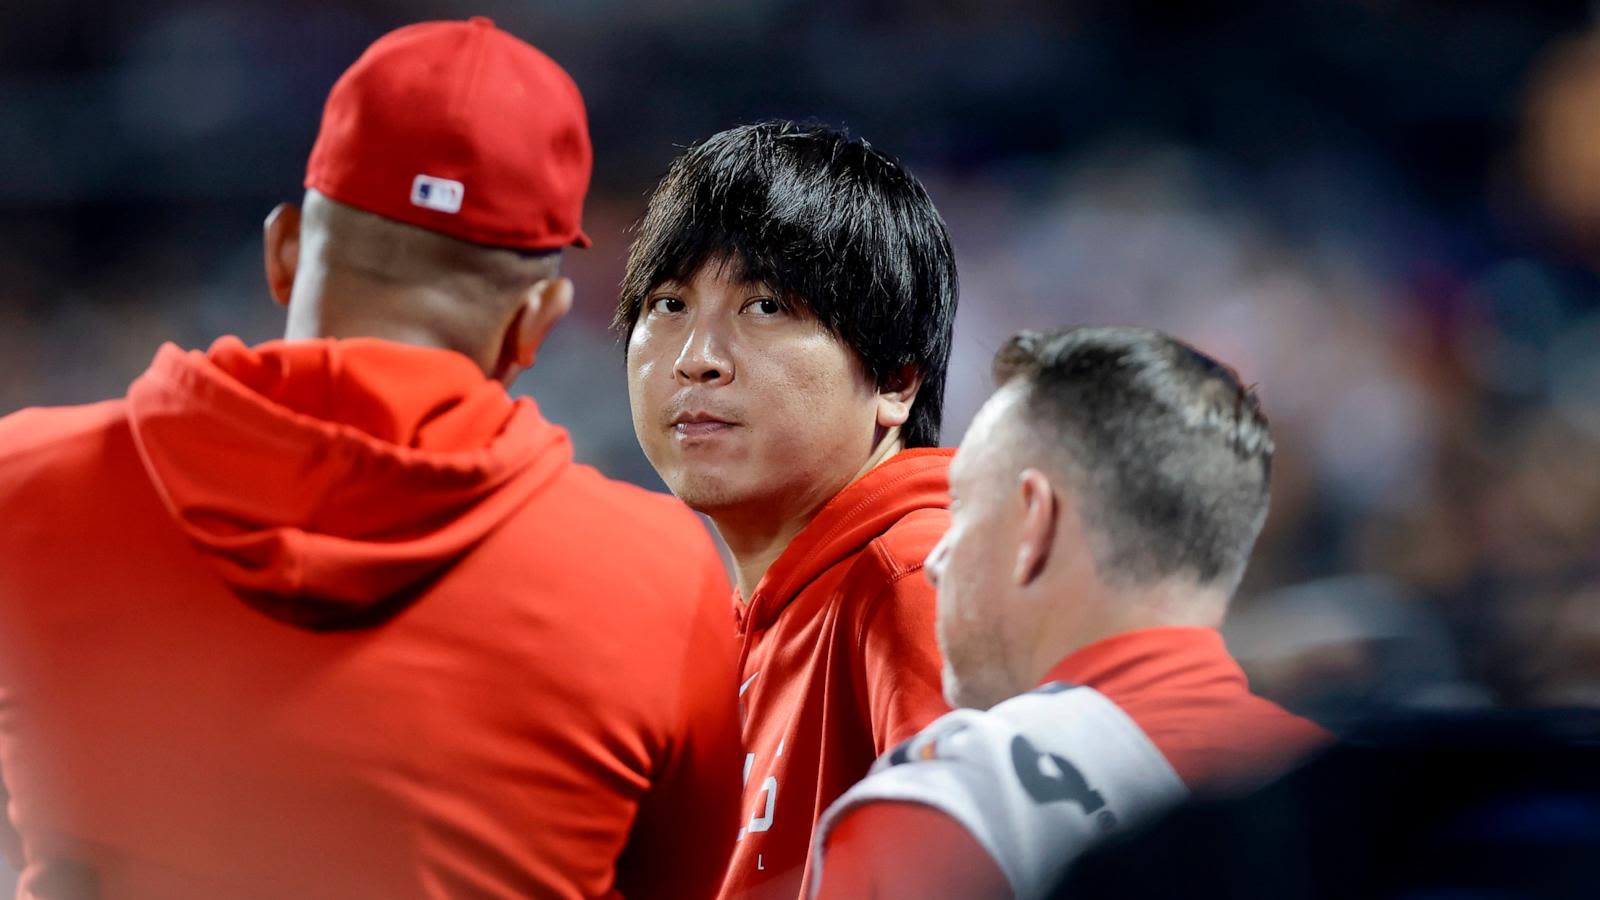 Ippei Mizuhara, Shohei Ohtani's interpreter, to plead guilty to stealing millions from star player